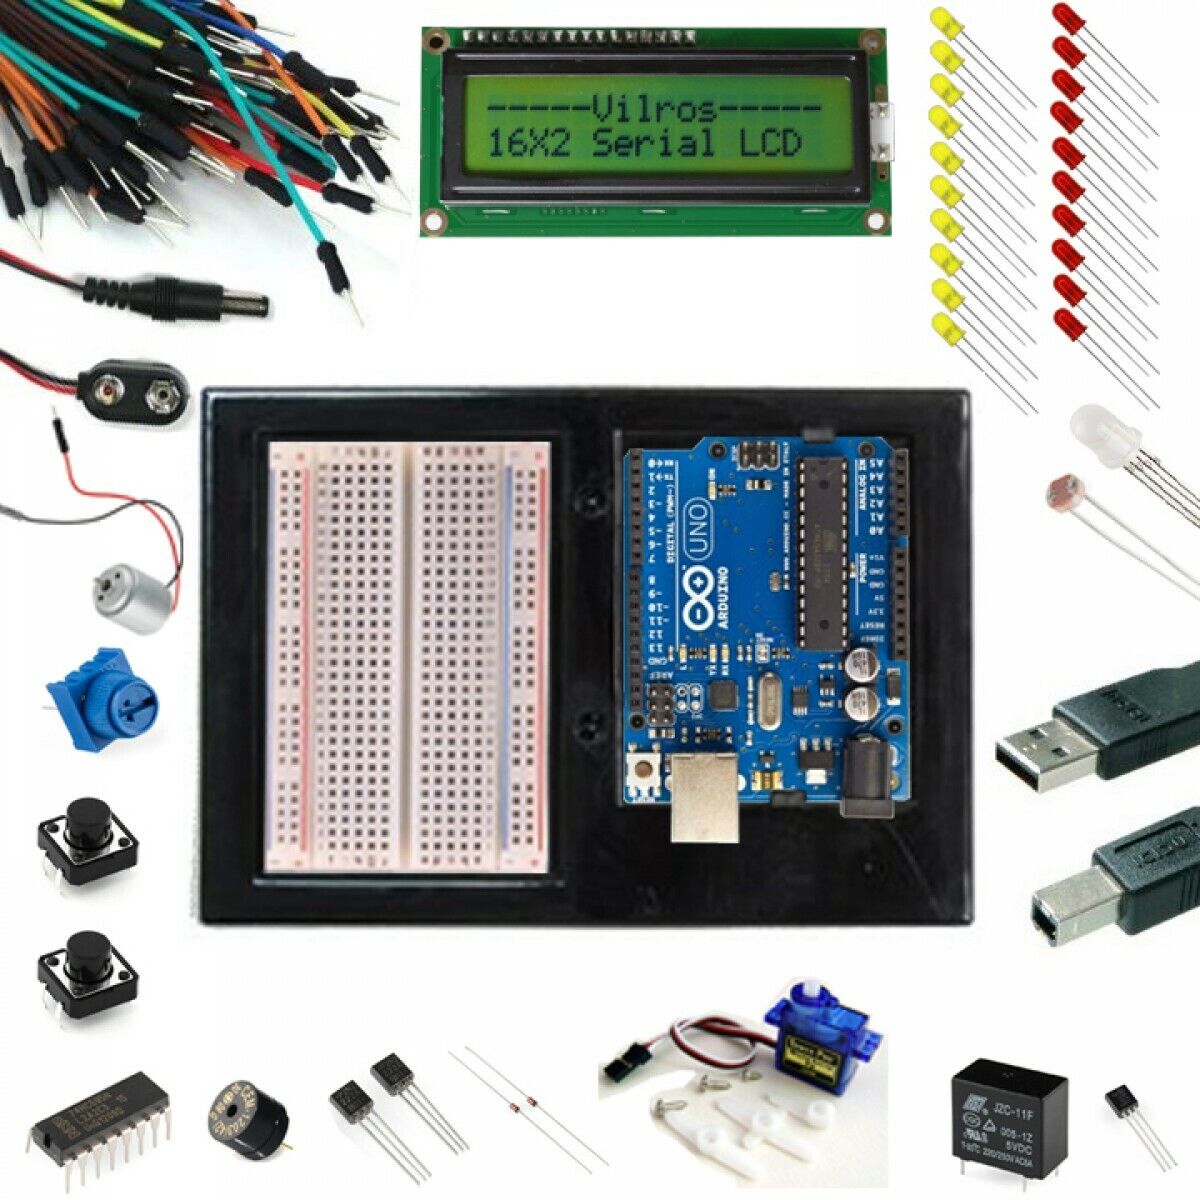 Vilros Arduino Uno Ultimate Starter Kit + LCD Module + 72 page Instruction Book